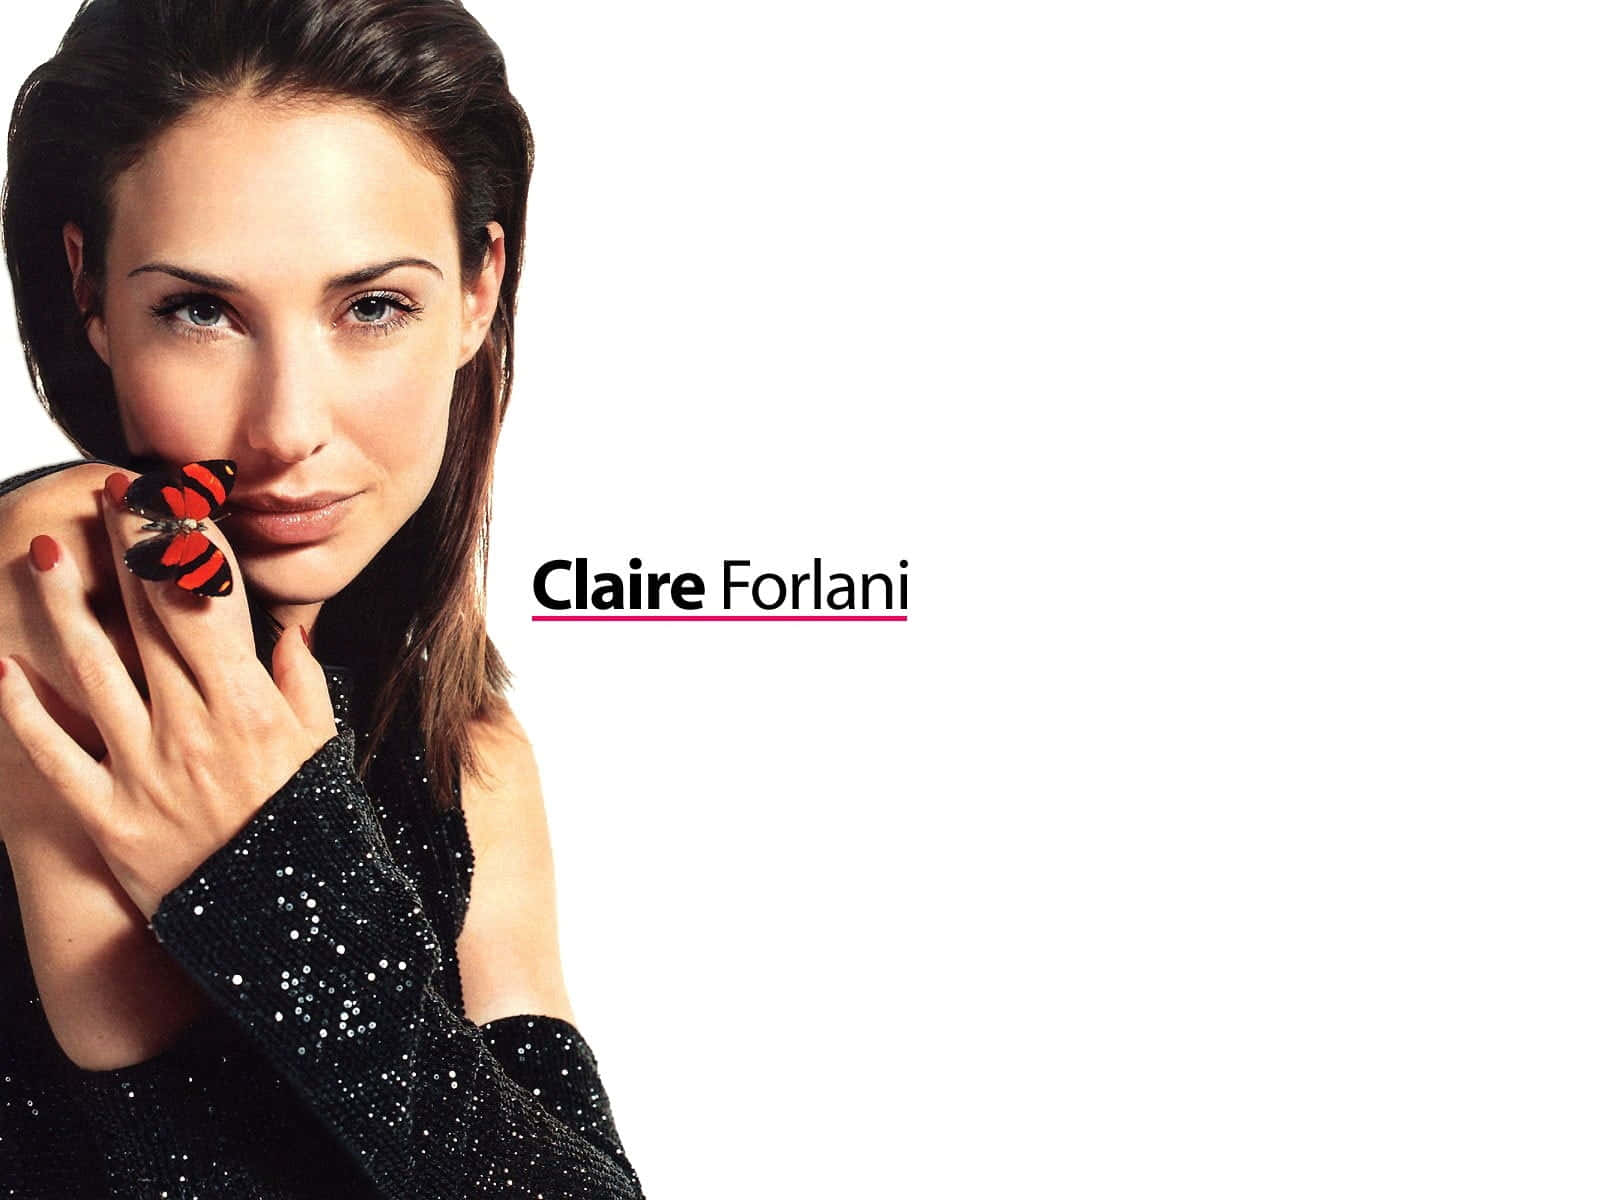 Claire Forlani Radiant Smile Wallpaper